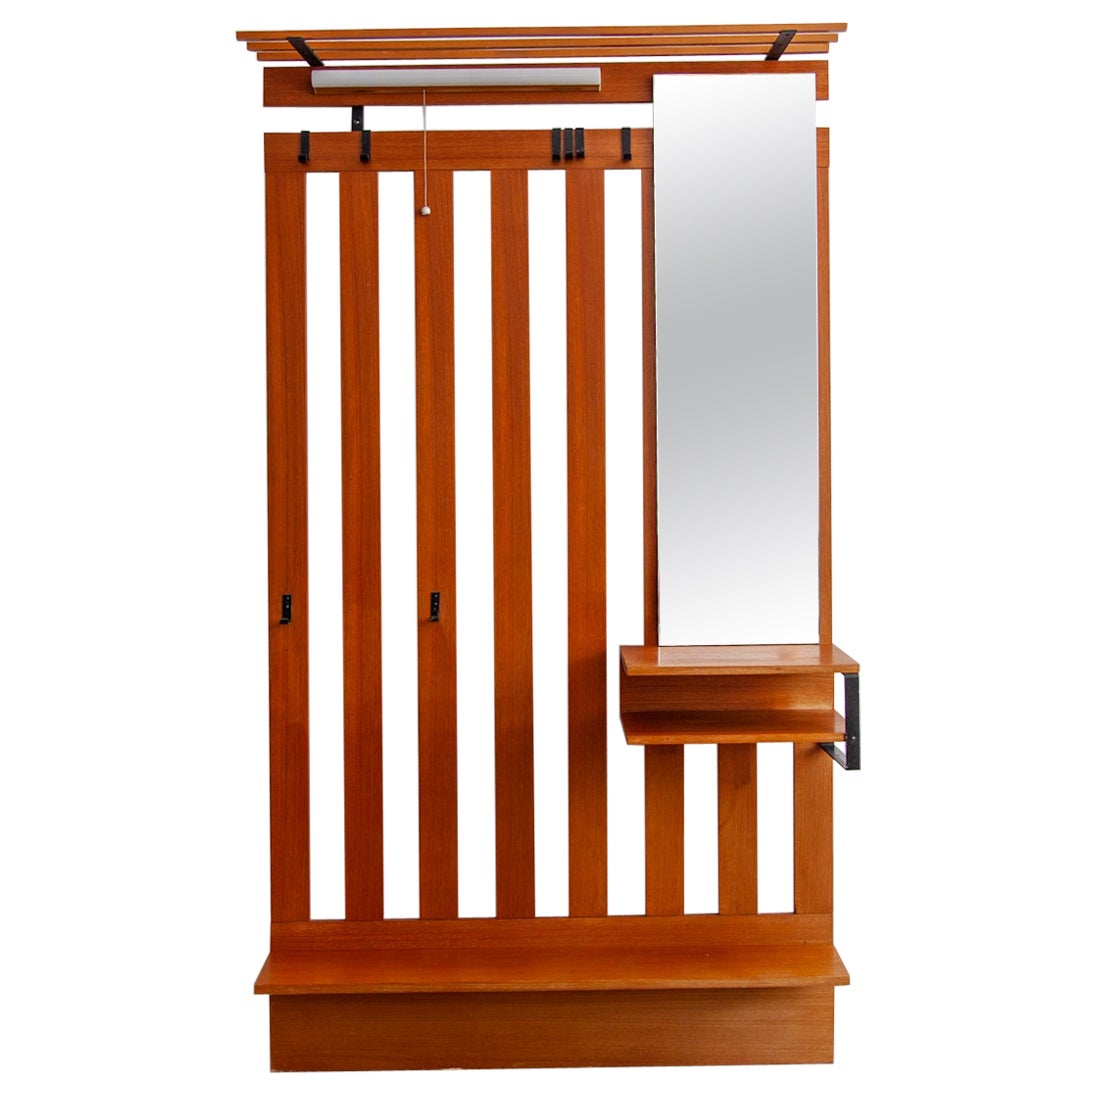 Wall mounted Slatted Large Entry Coat and Hat Rack with Mirror and Shelf, 1960s